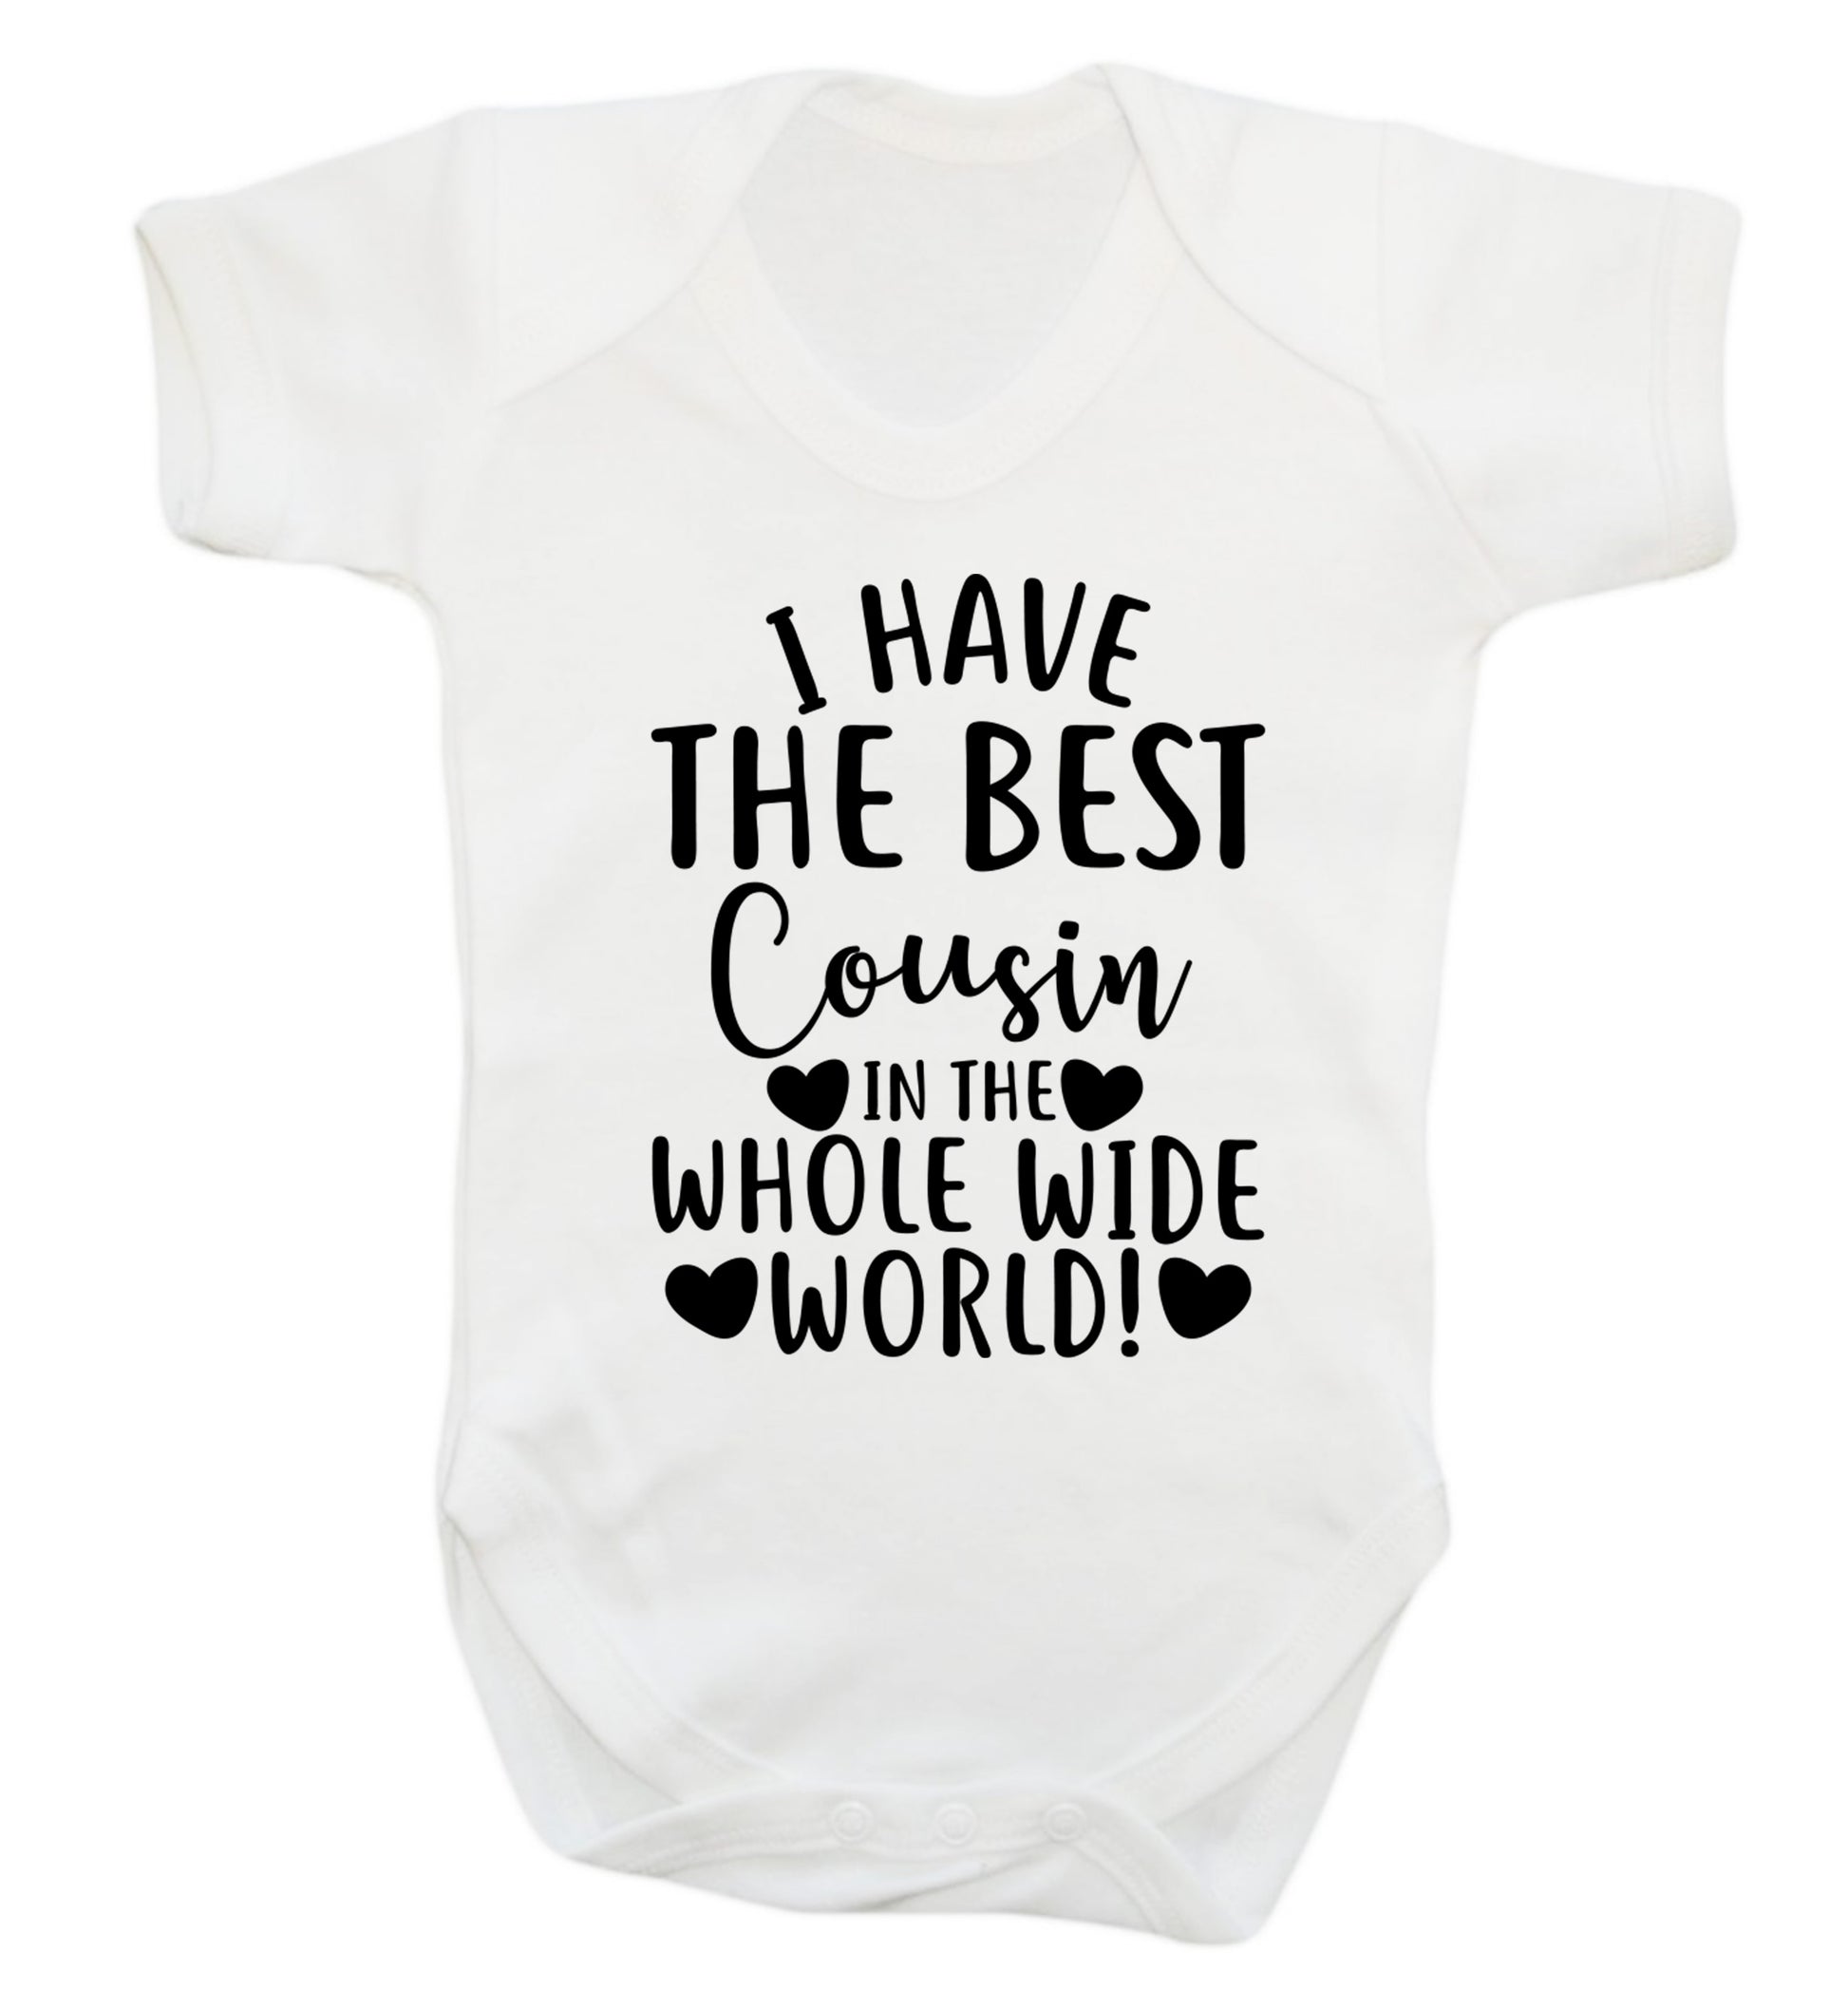 I have the best cousin in the whole wide world! Baby Vest white 18-24 months